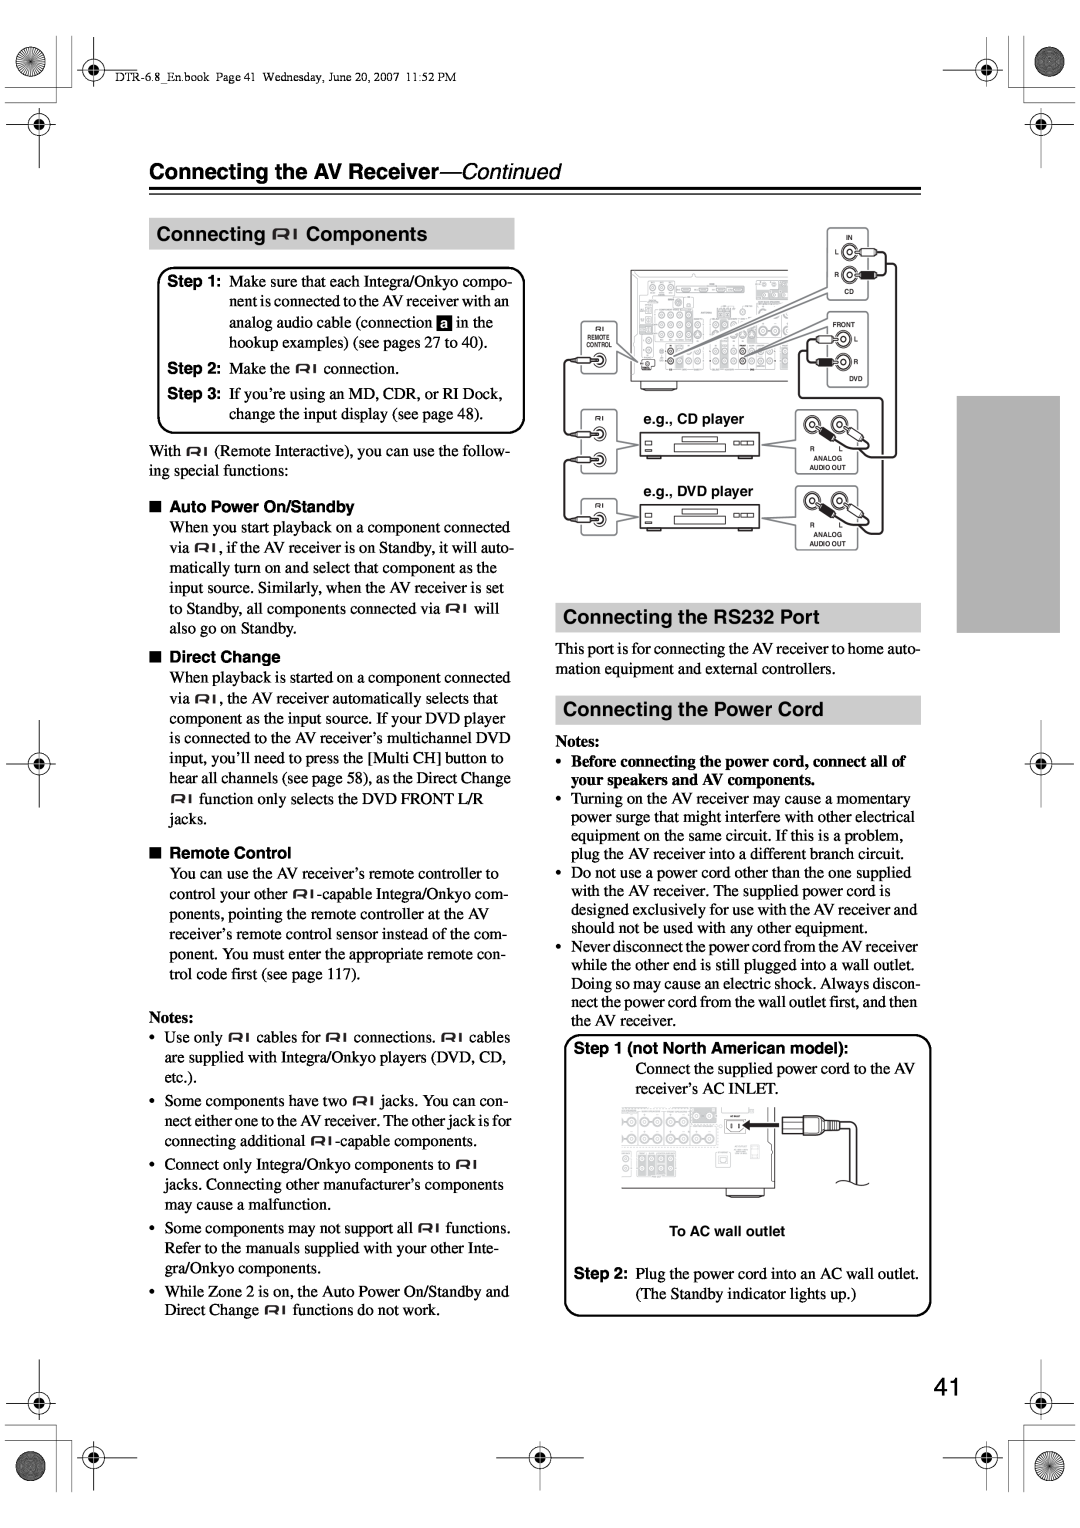 Integra DTR-6.8 instruction manual Connecting Components, Connecting the RS232 Port, Connecting the Power Cord, Notes 